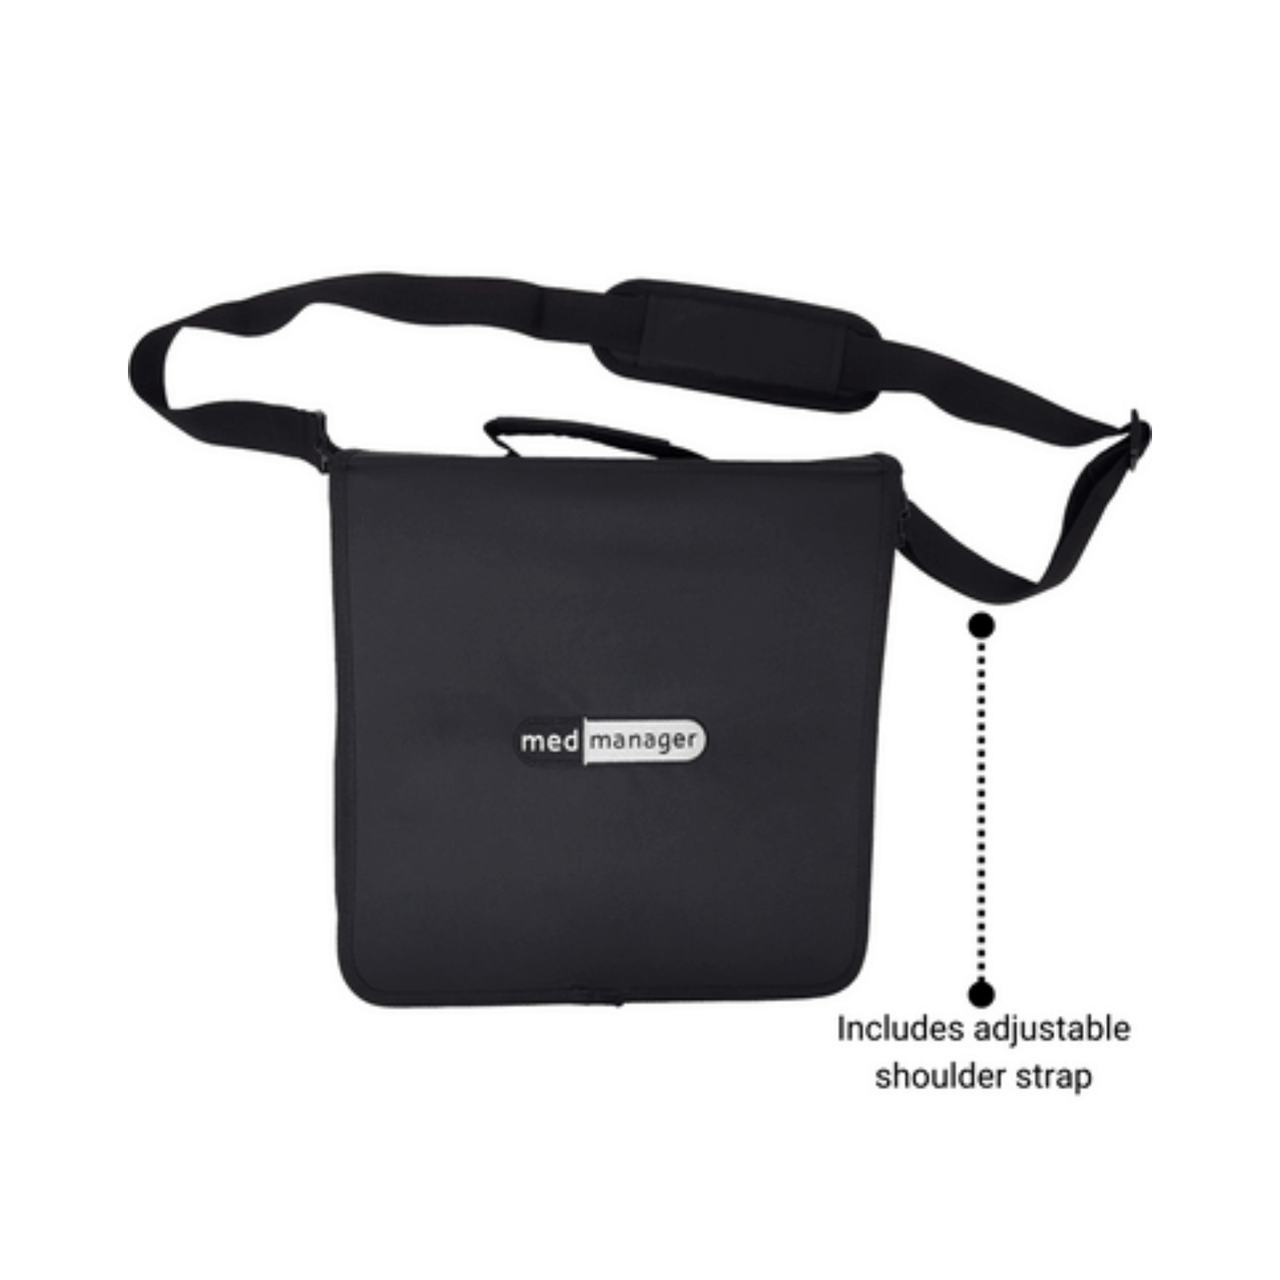 https://cdn11.bigcommerce.com/s-6dpzi5pd3/images/stencil/1280x1280/products/119/424/Economy_Medicine_Organizer_and_Pill_Case_with_Strap_1__13718.1694722490.png?c=1?imbypass=on